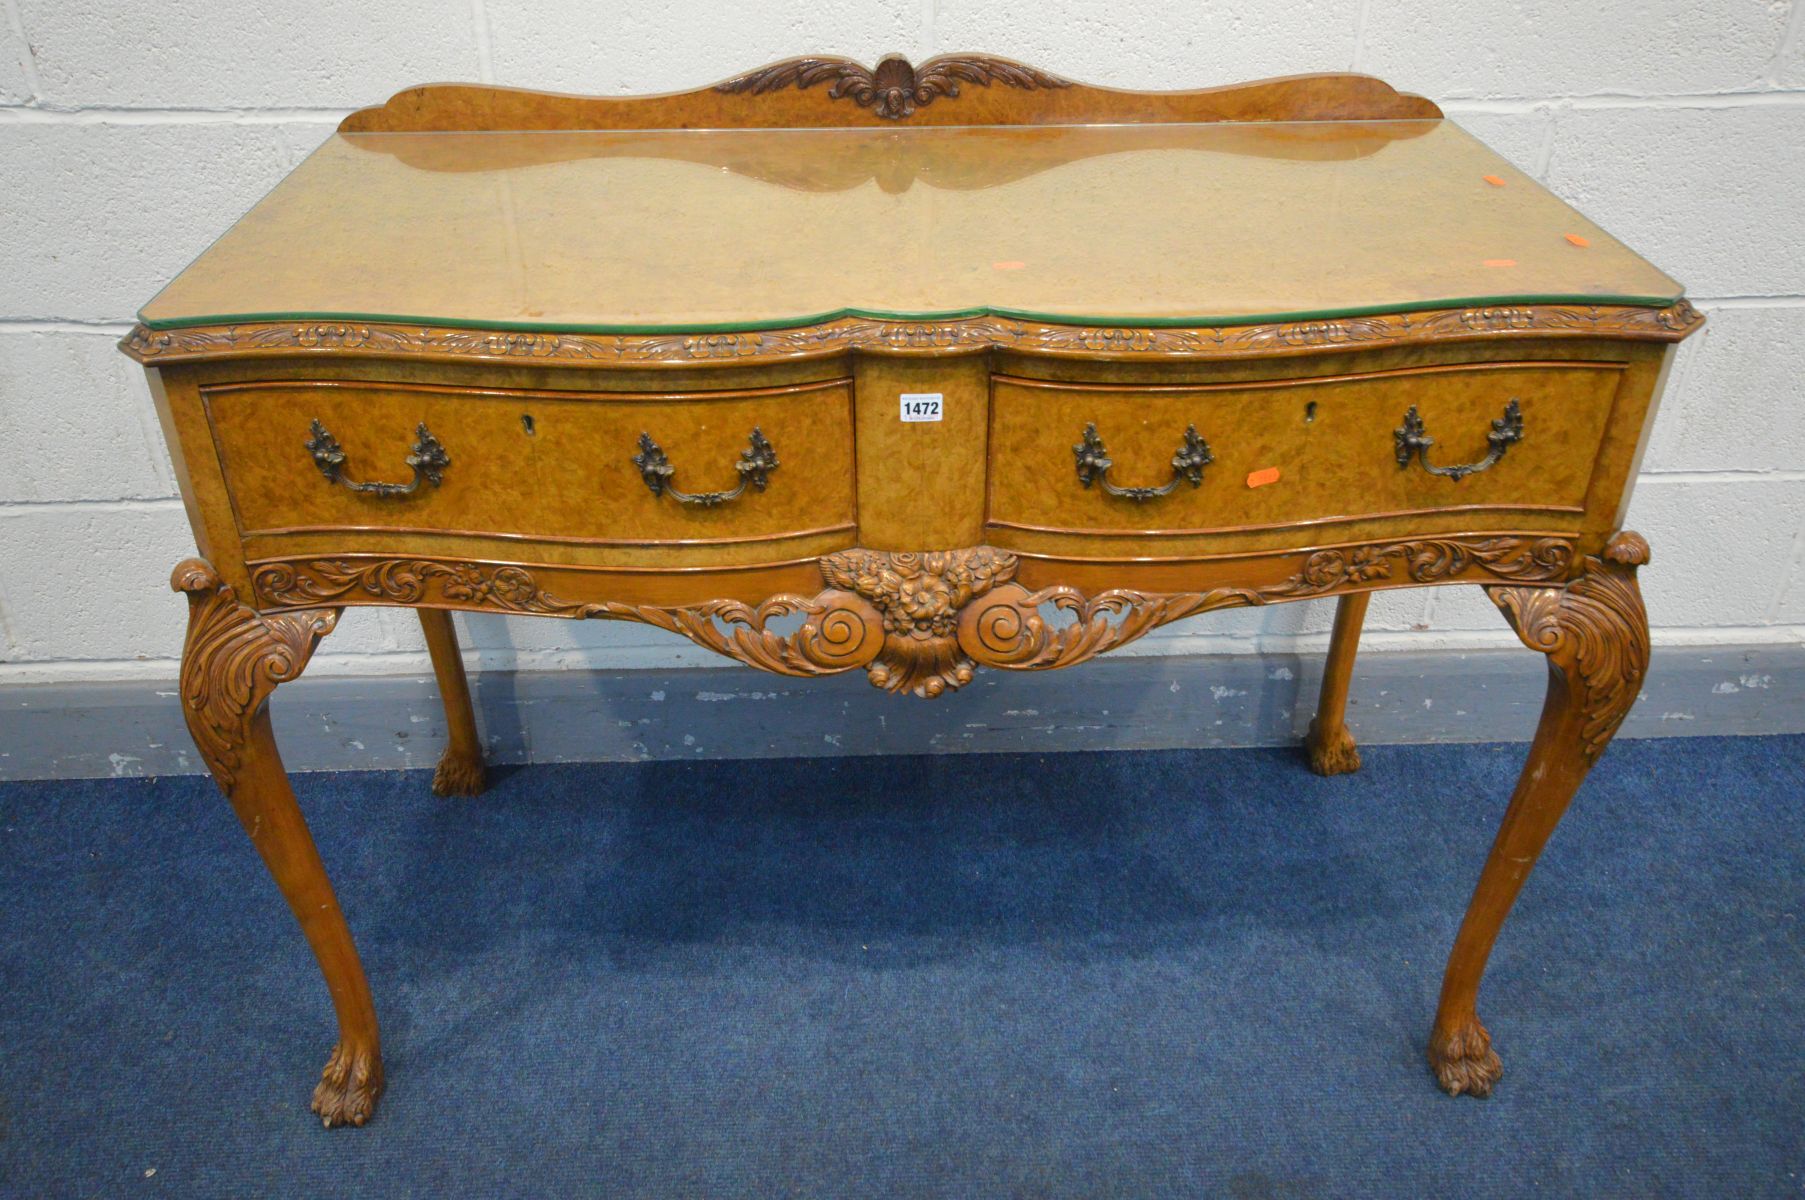 A REPRODUCTION VICTORIAN STYLE BURR WALNUT SERPENTINE SIDE TABLE, with a raised back, two frieze